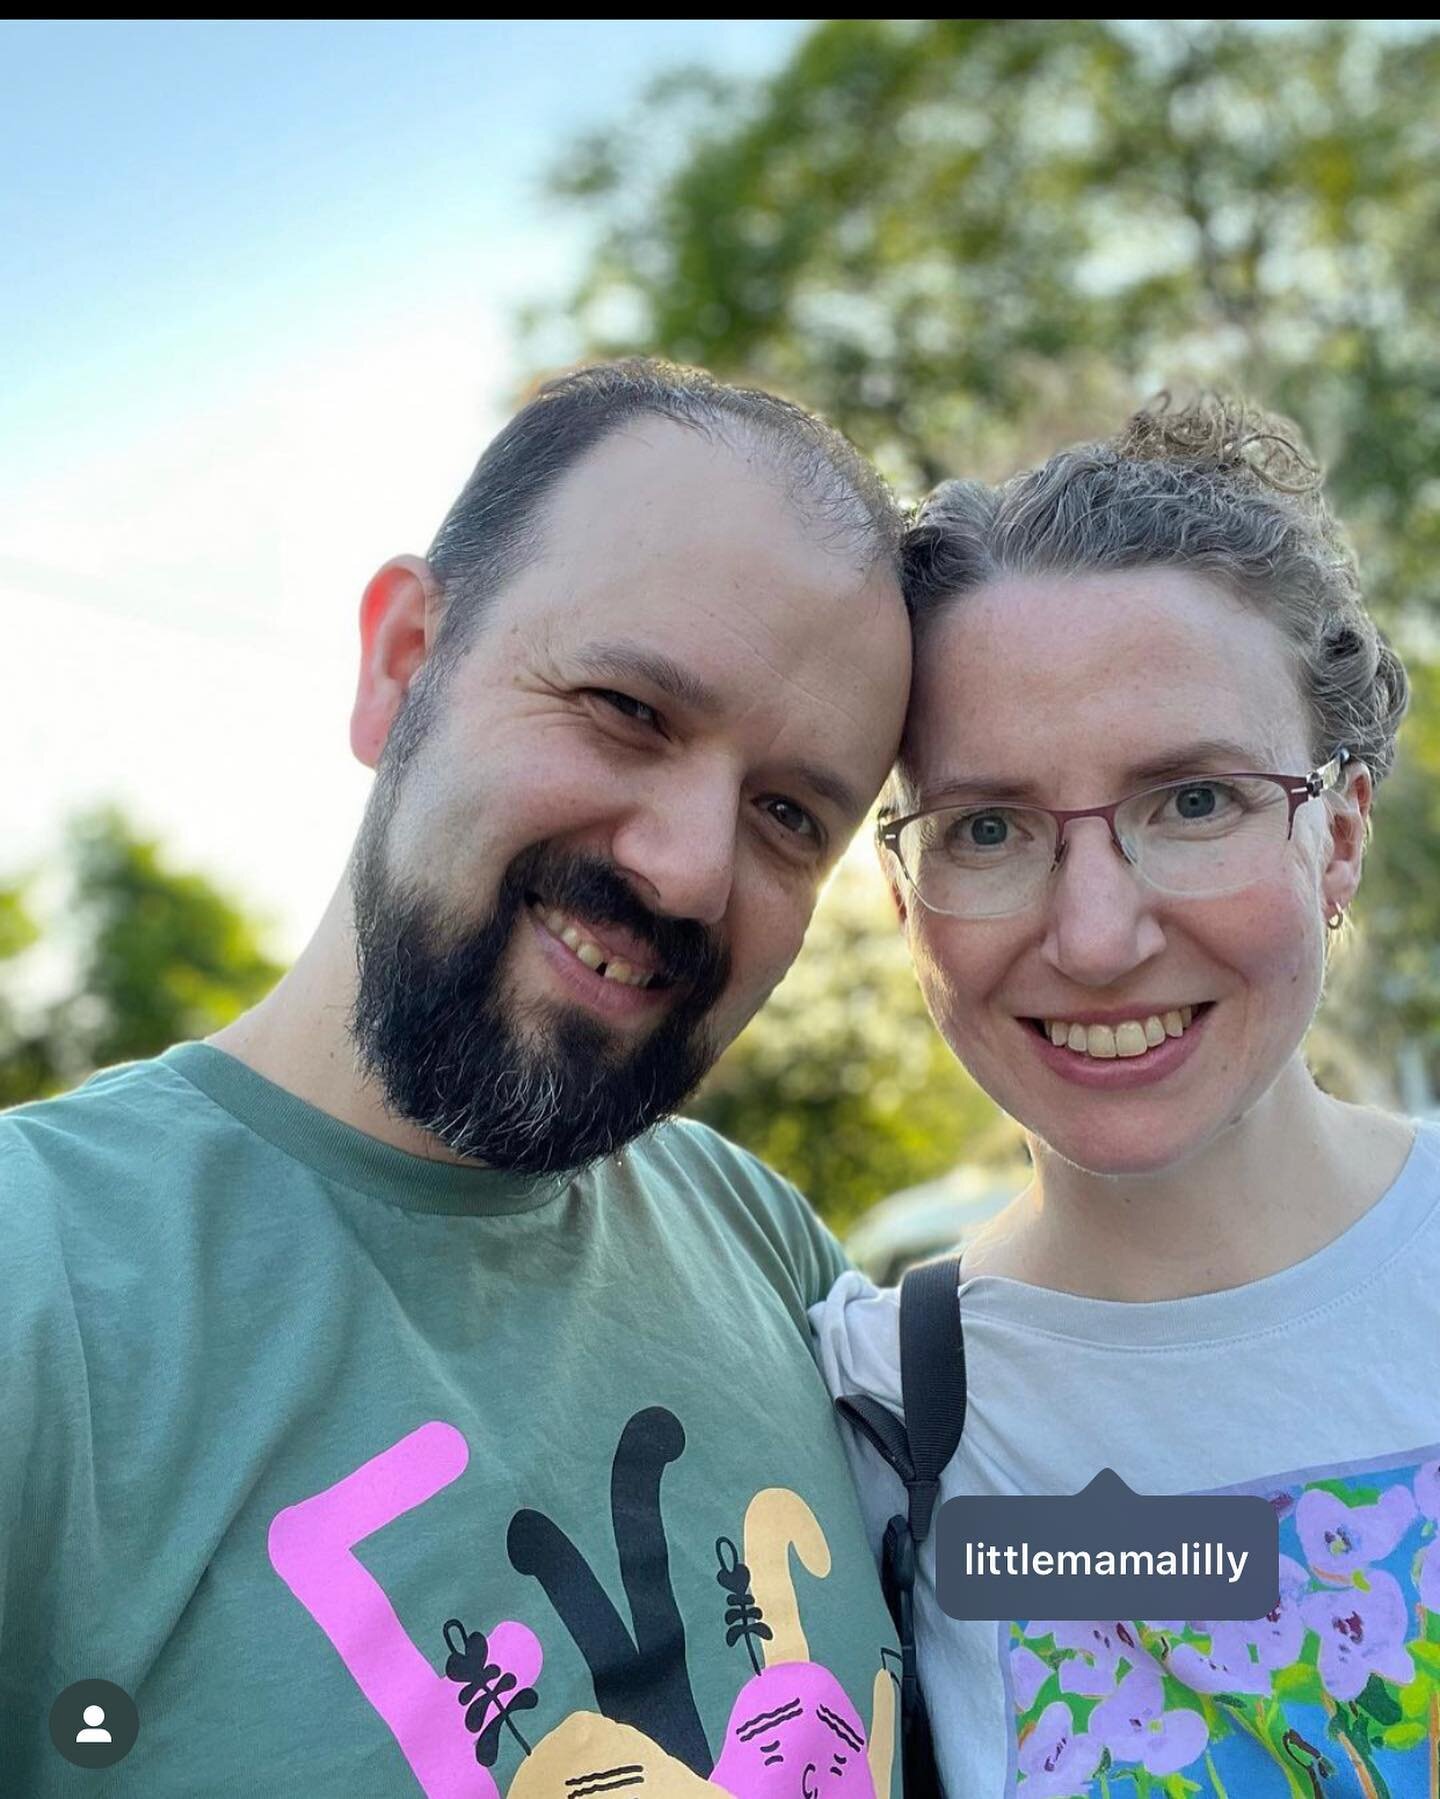 Many thanks to you all for supporting our Artist Ed. Collaboration T&rsquo;s! Here&rsquo;s our friend David  @davidcooks_davideats and his wife Lily in Portland with T-shirt game strong 💪 for Spring Summer Fresh Flavors! Thanks guys! Btw only one gr